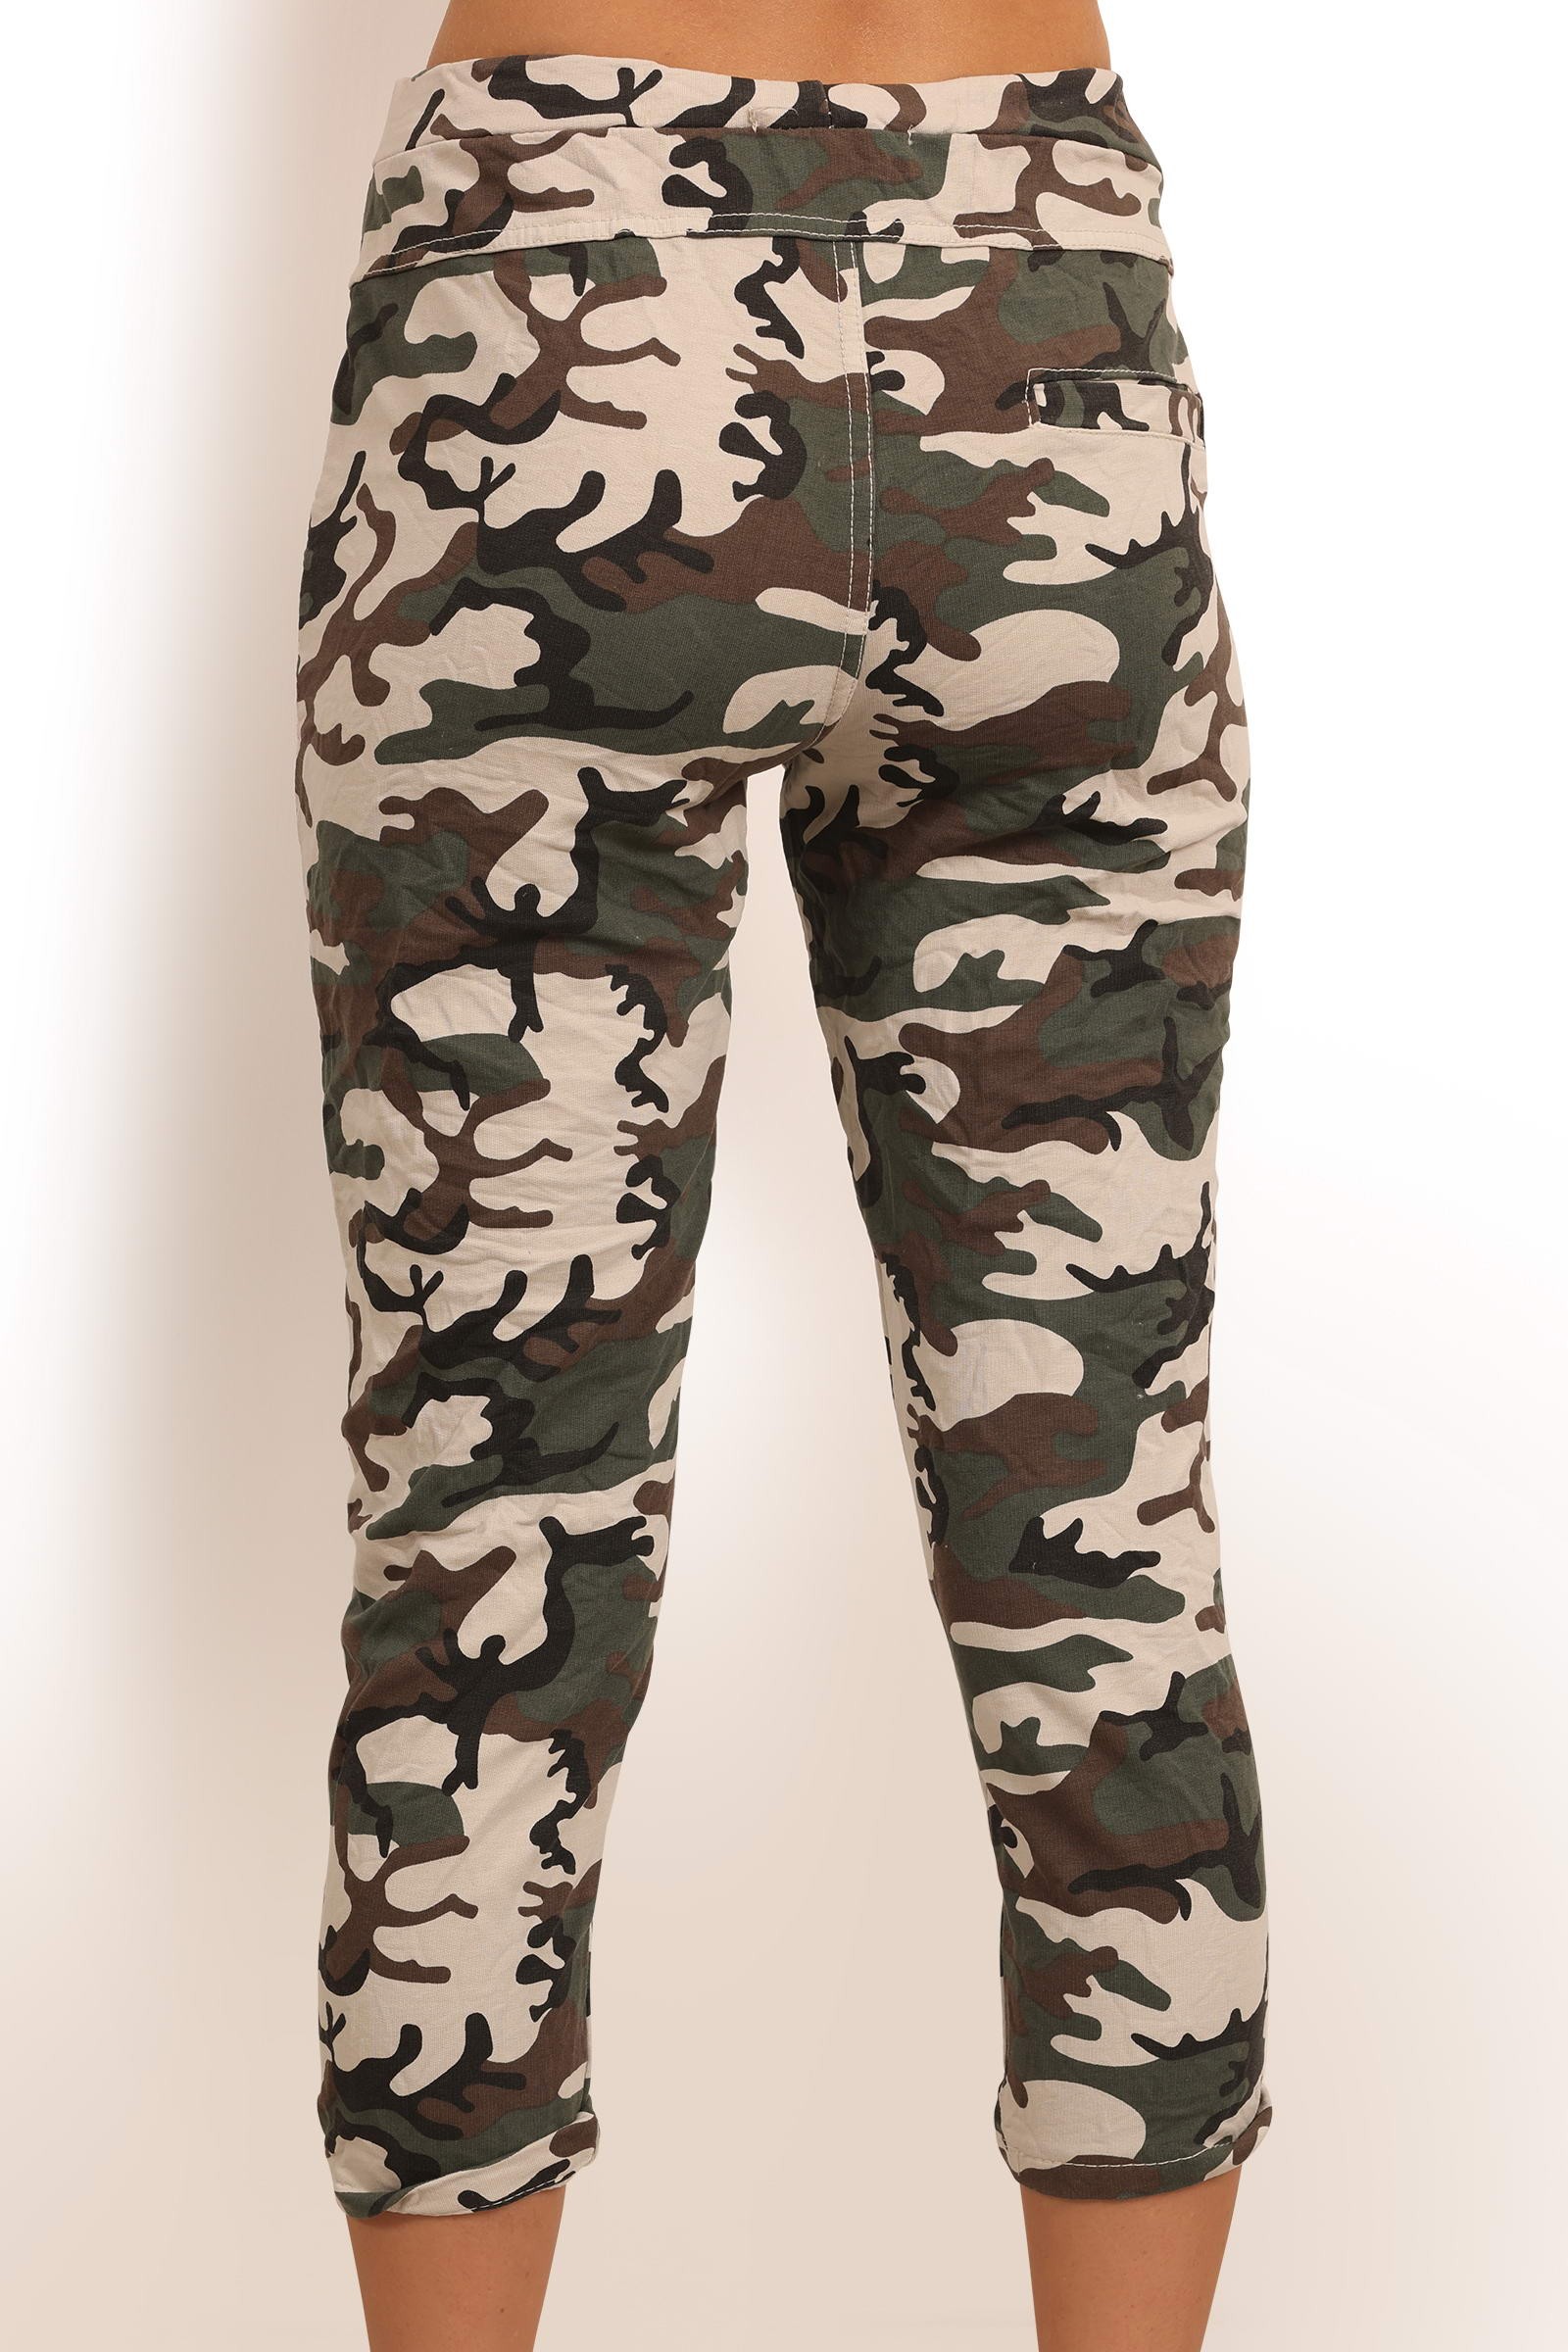 Knickers i mørk camouflage style 7612